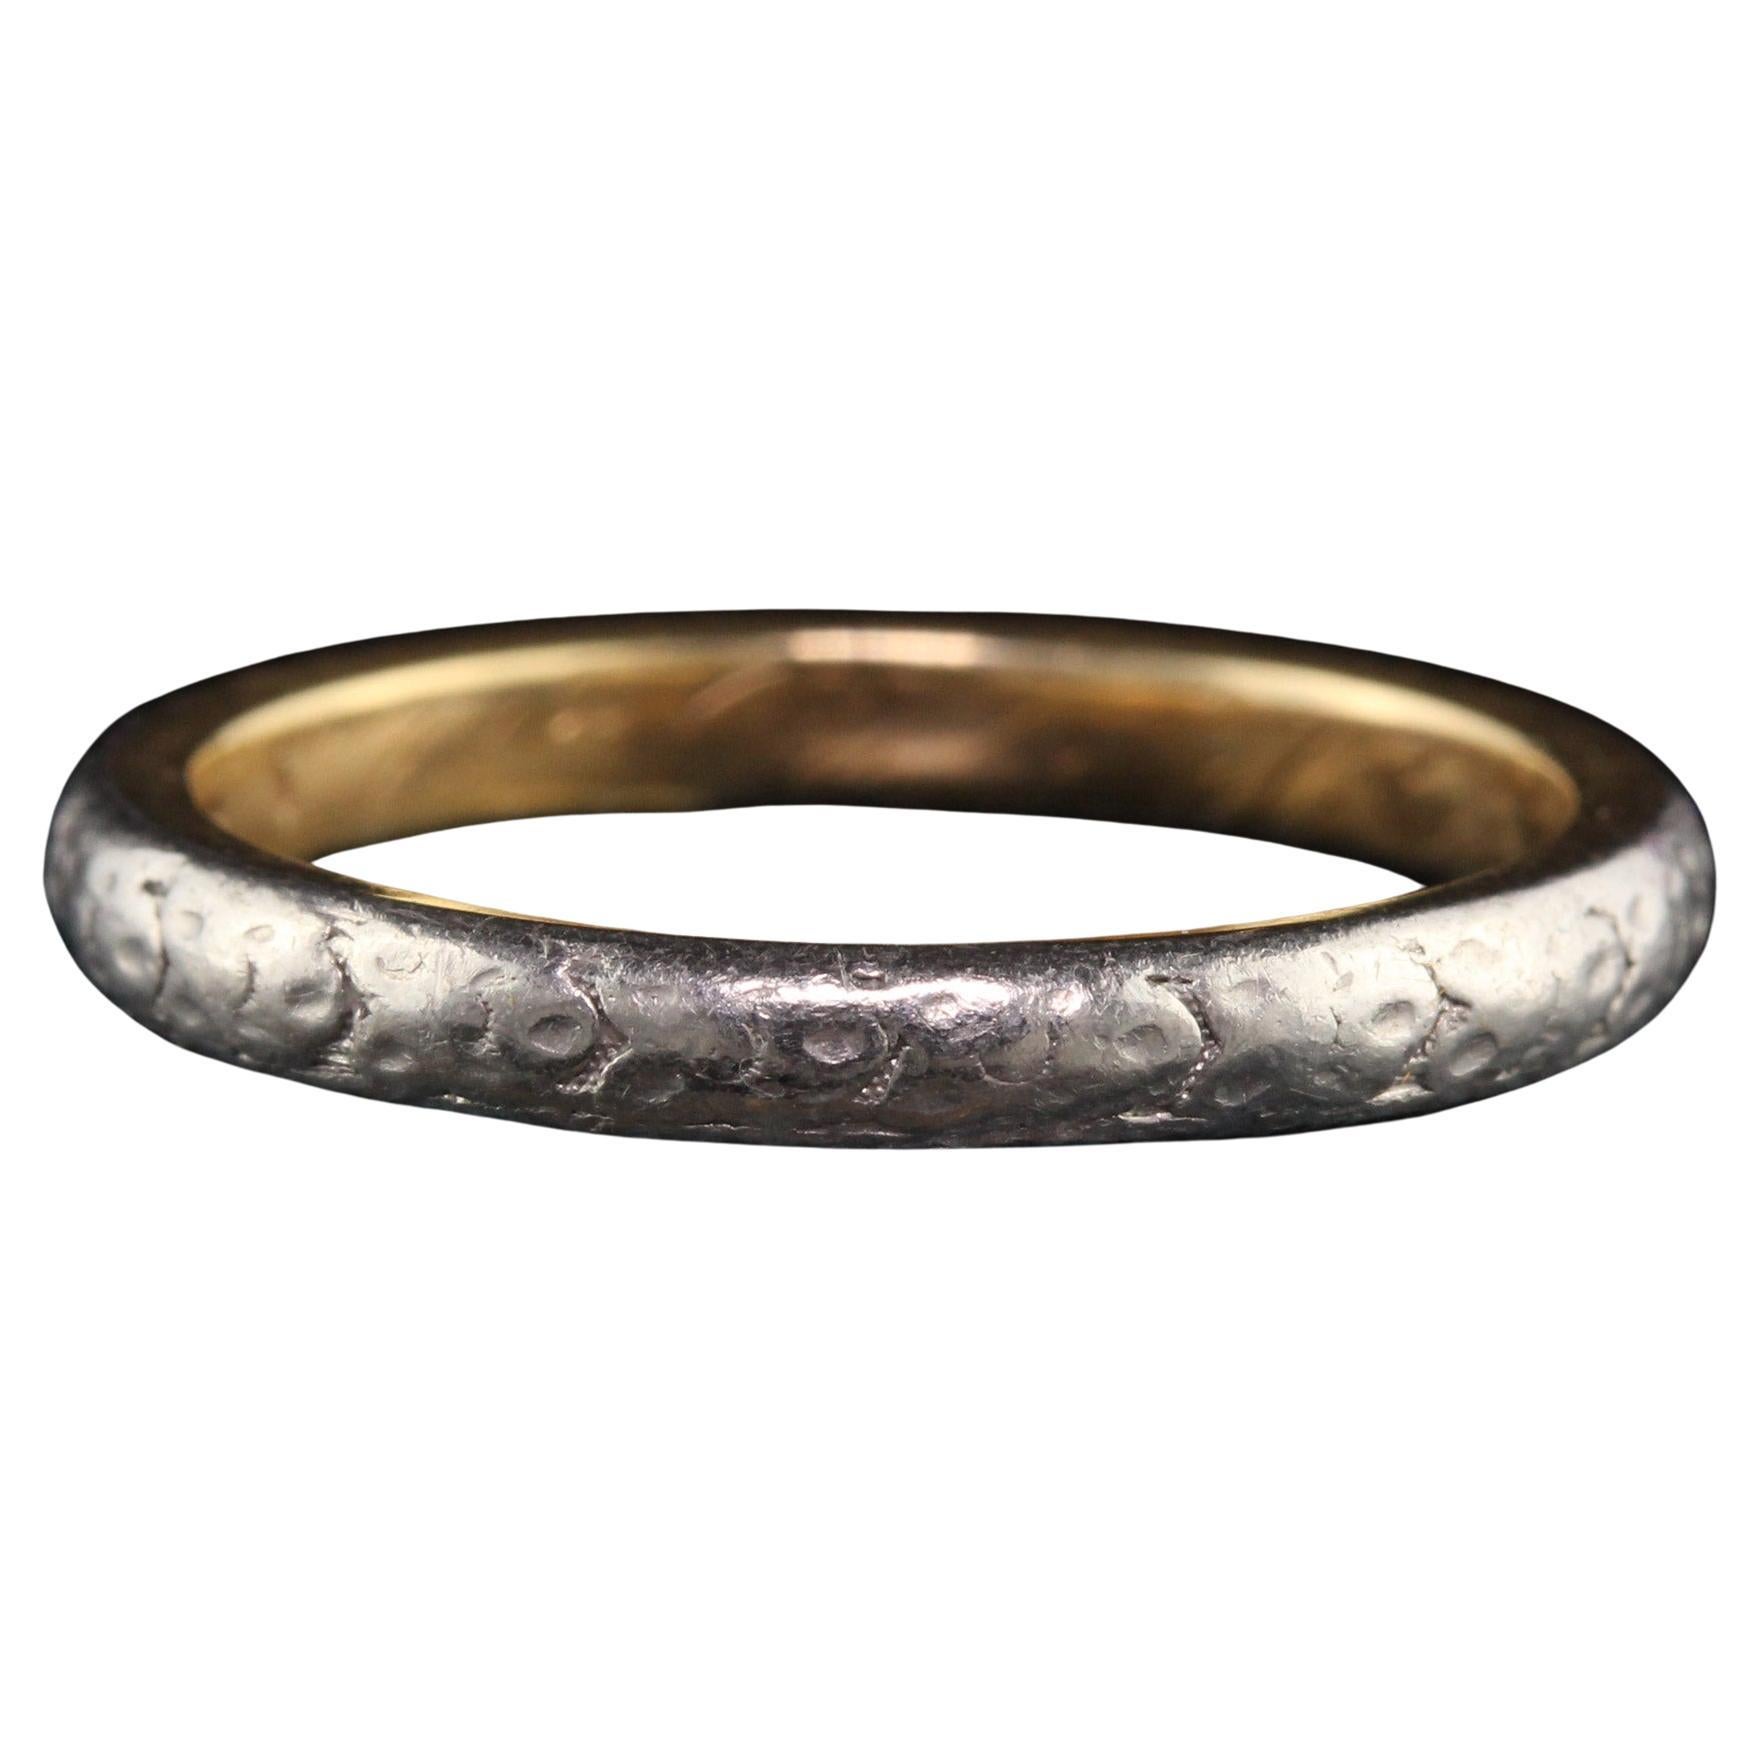 Antique Art Deco 18K Yellow Gold and Platinum Engraved Wedding Band For Sale